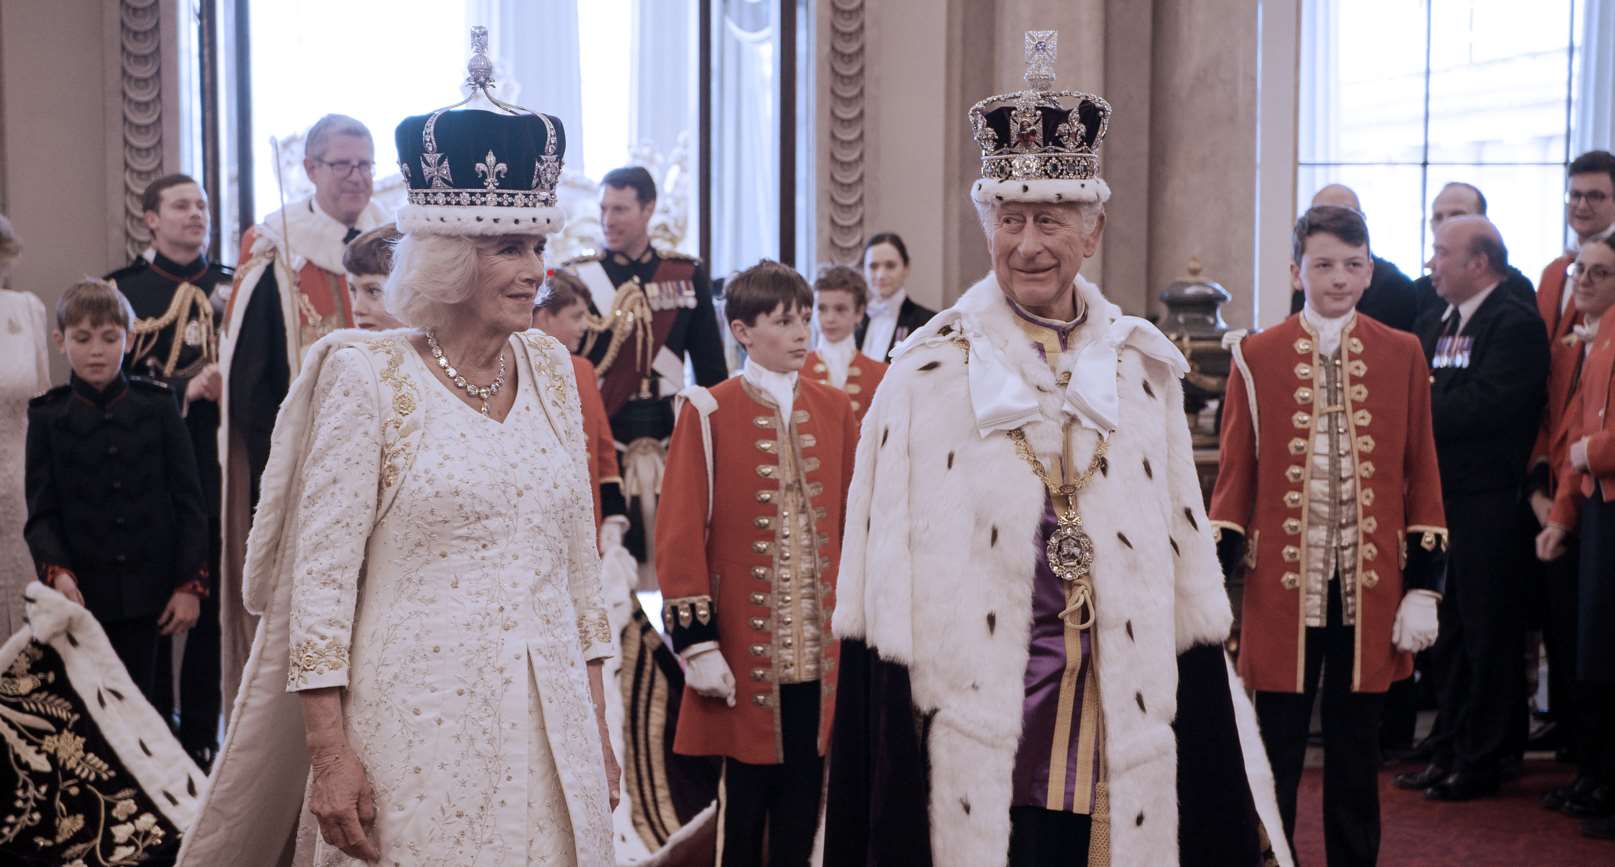 Camilla and Charles dressed in full regalia arrive back at Buckingham Palace after the coronation (BBC/Oxford Film and Television)